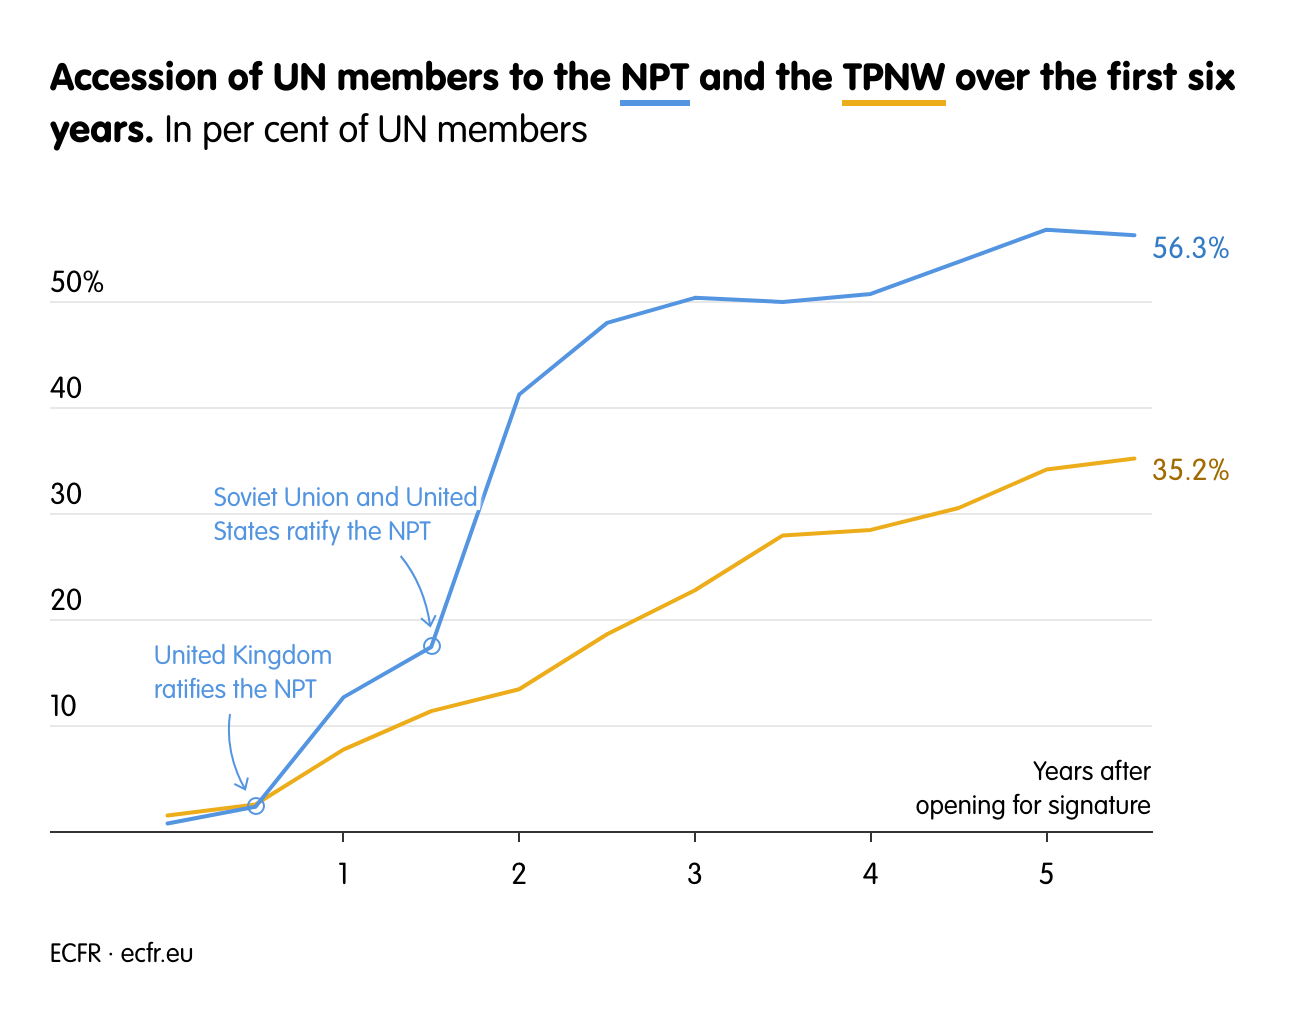 Accession of UN members to the NPT and the TPNW over the first six years.